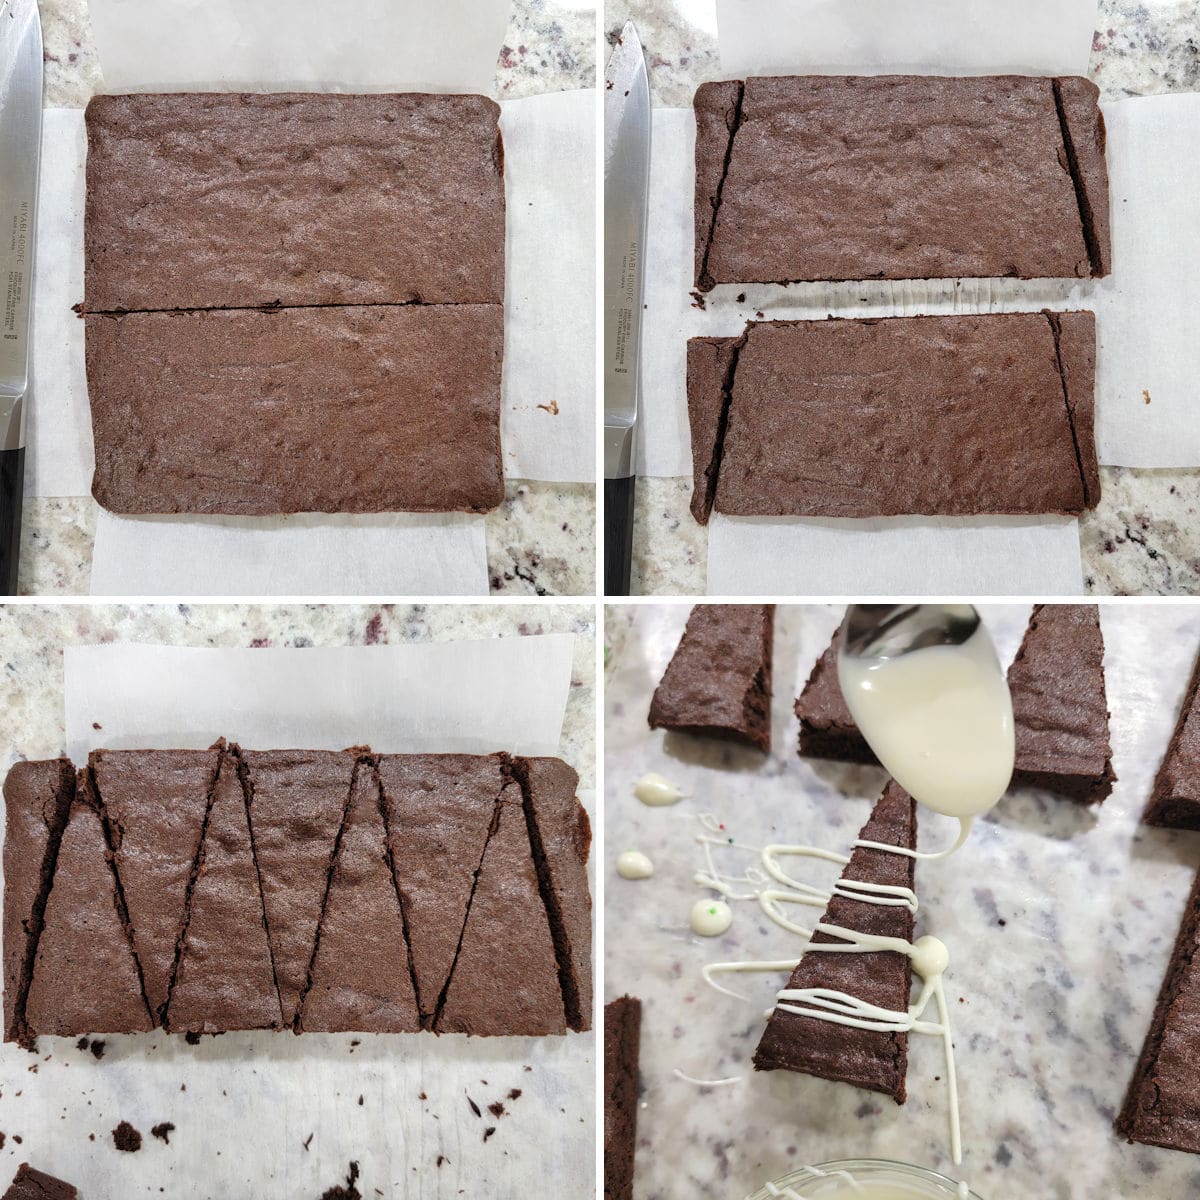 Slicing brownies into tree shapes.